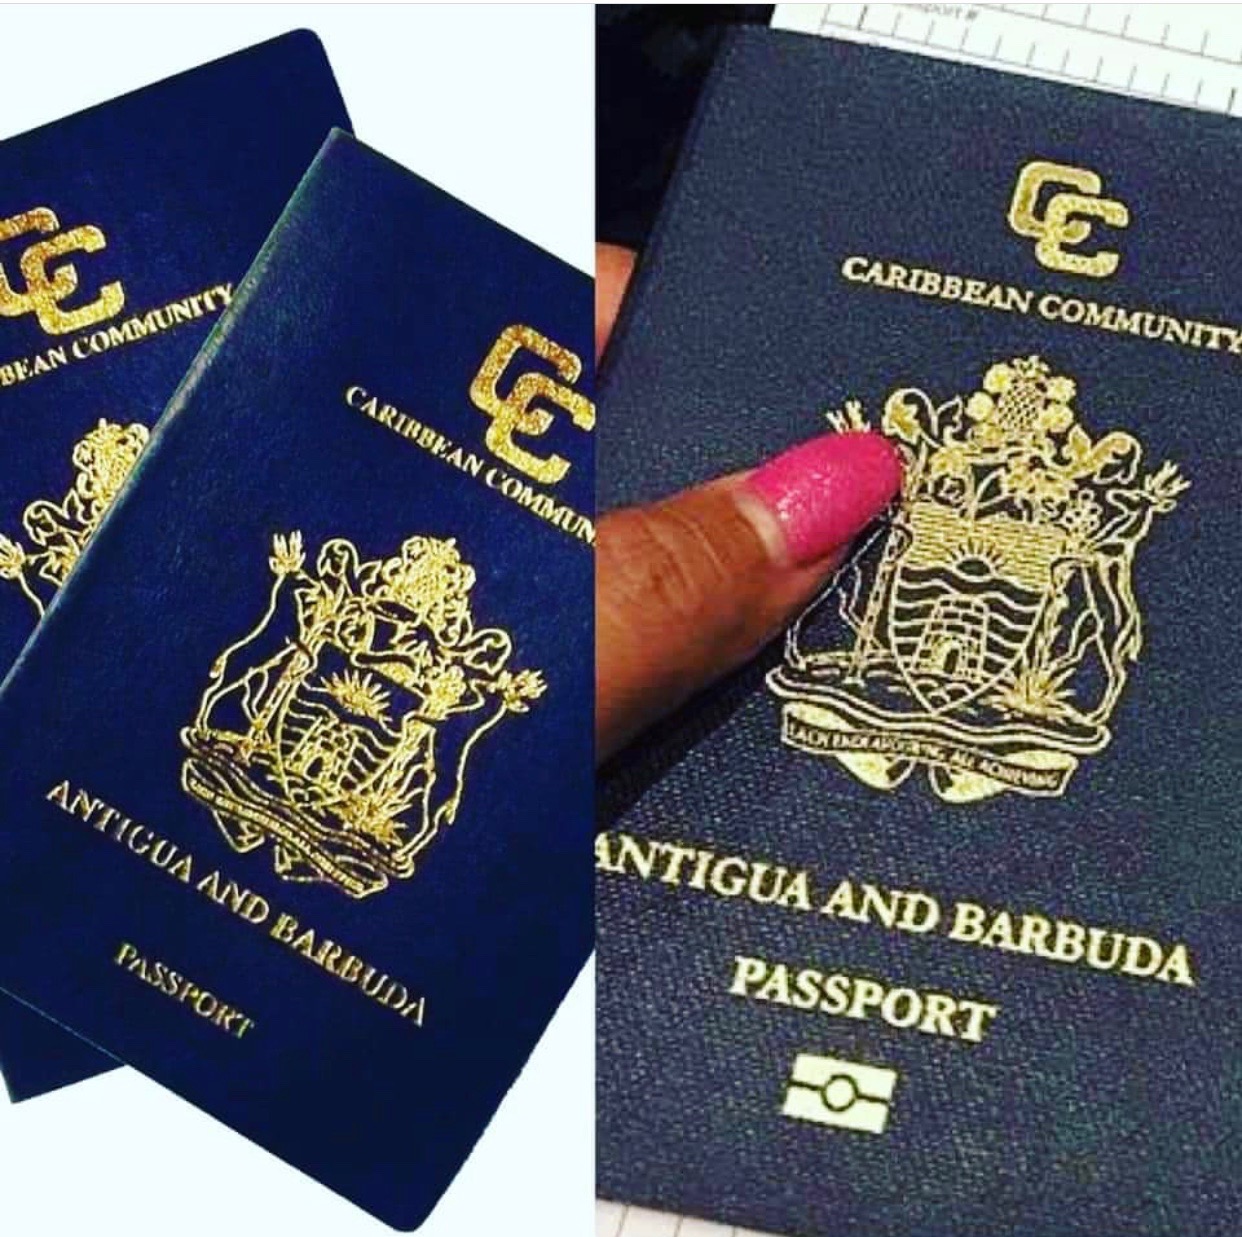 Scrap CIP or lose visa-free access to Europe, Antigua and other CIP countries told